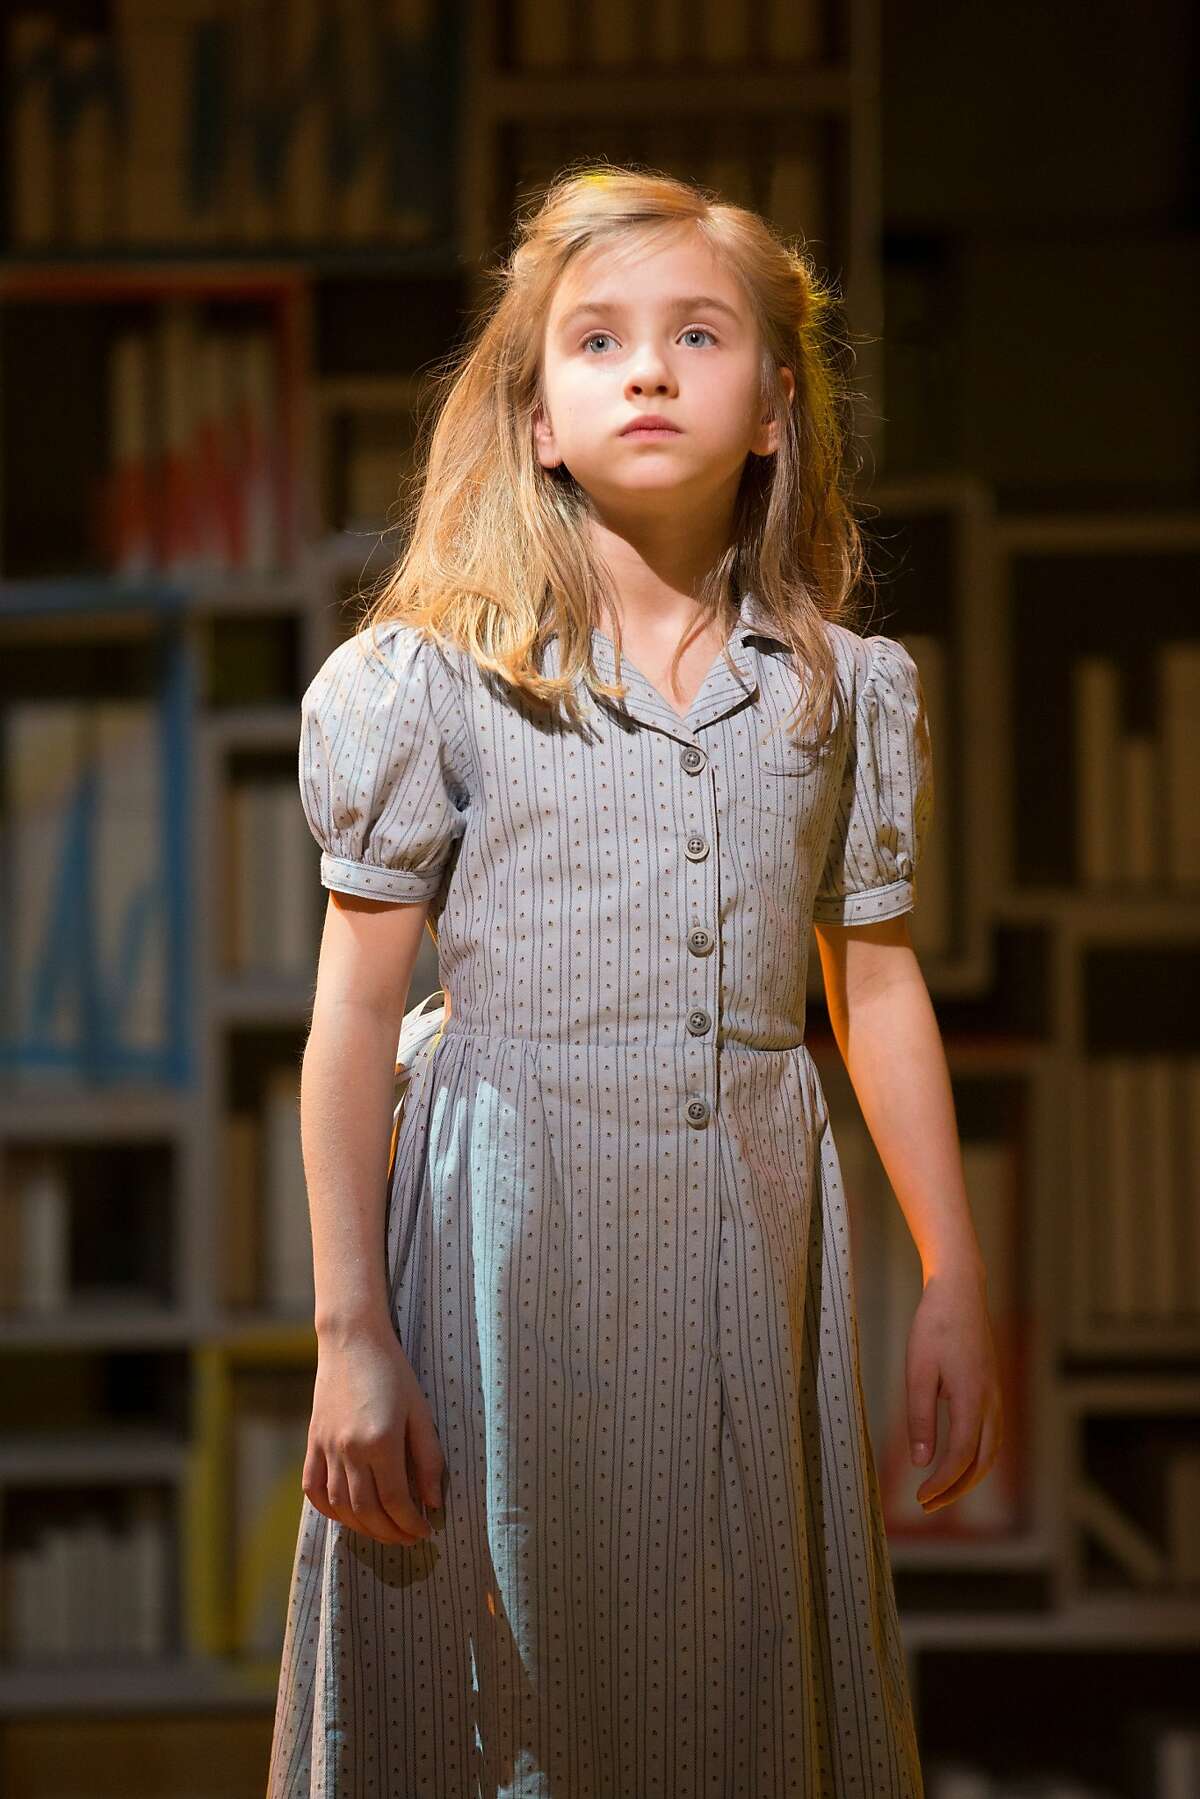 Mabel Tyler as the precocious and resourceful Matilda in "Matilda the Musical"